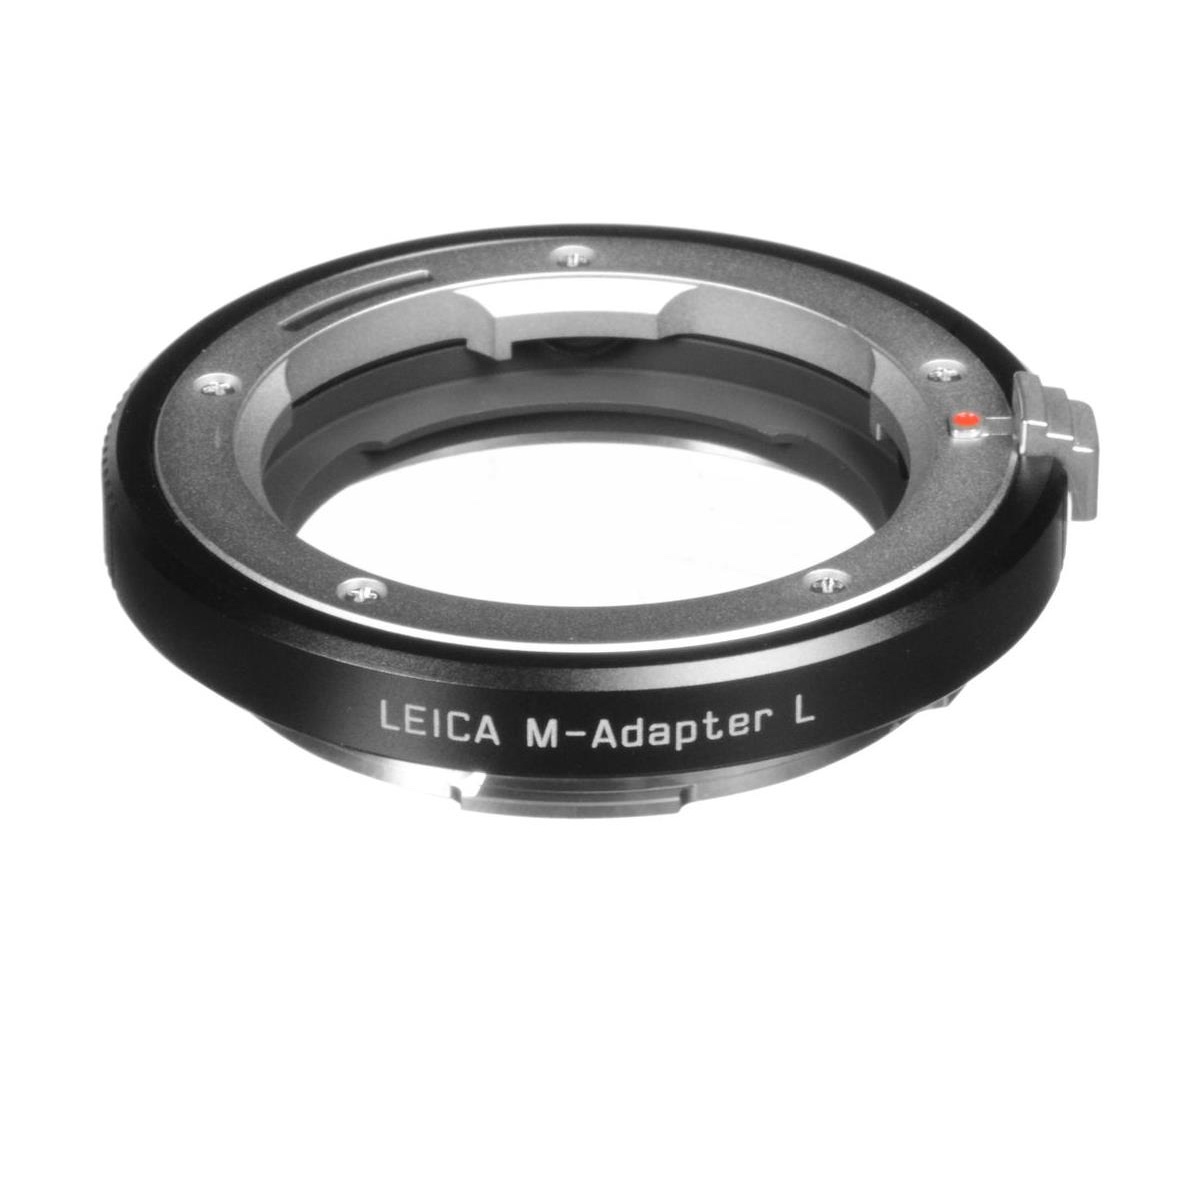 TThumbnail image for Leica M-Adapter L